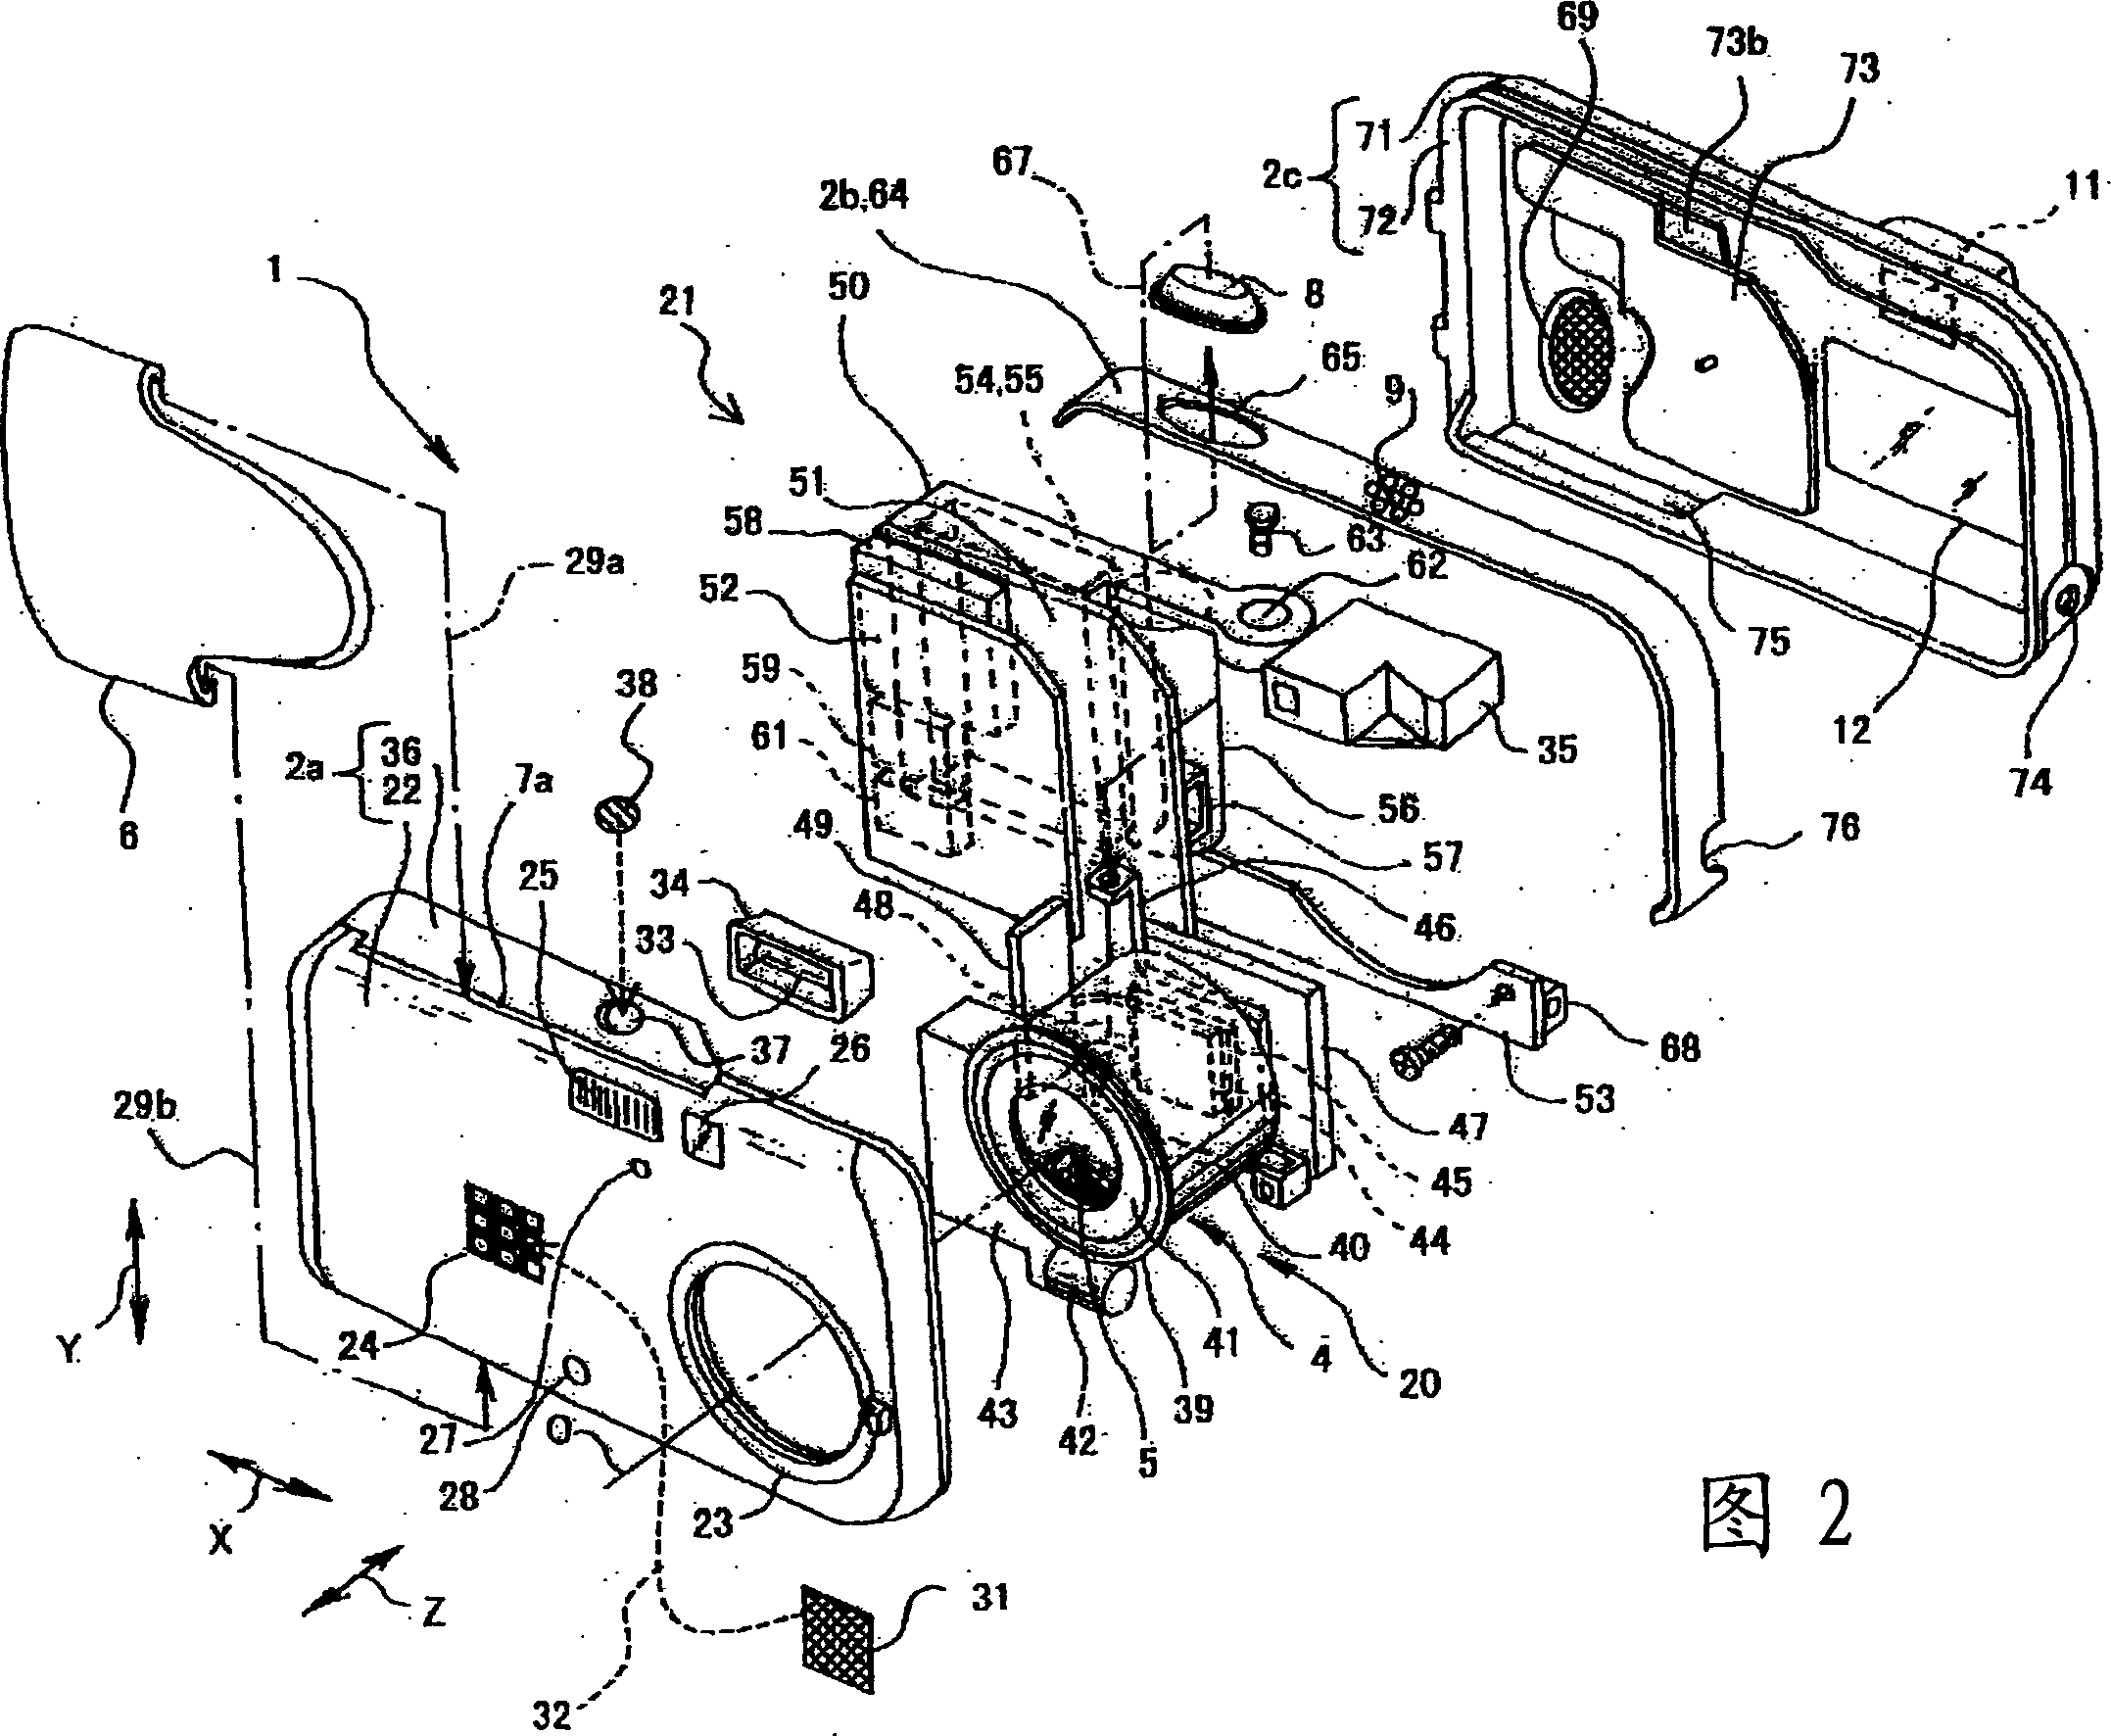 Camera and electronic apparatus